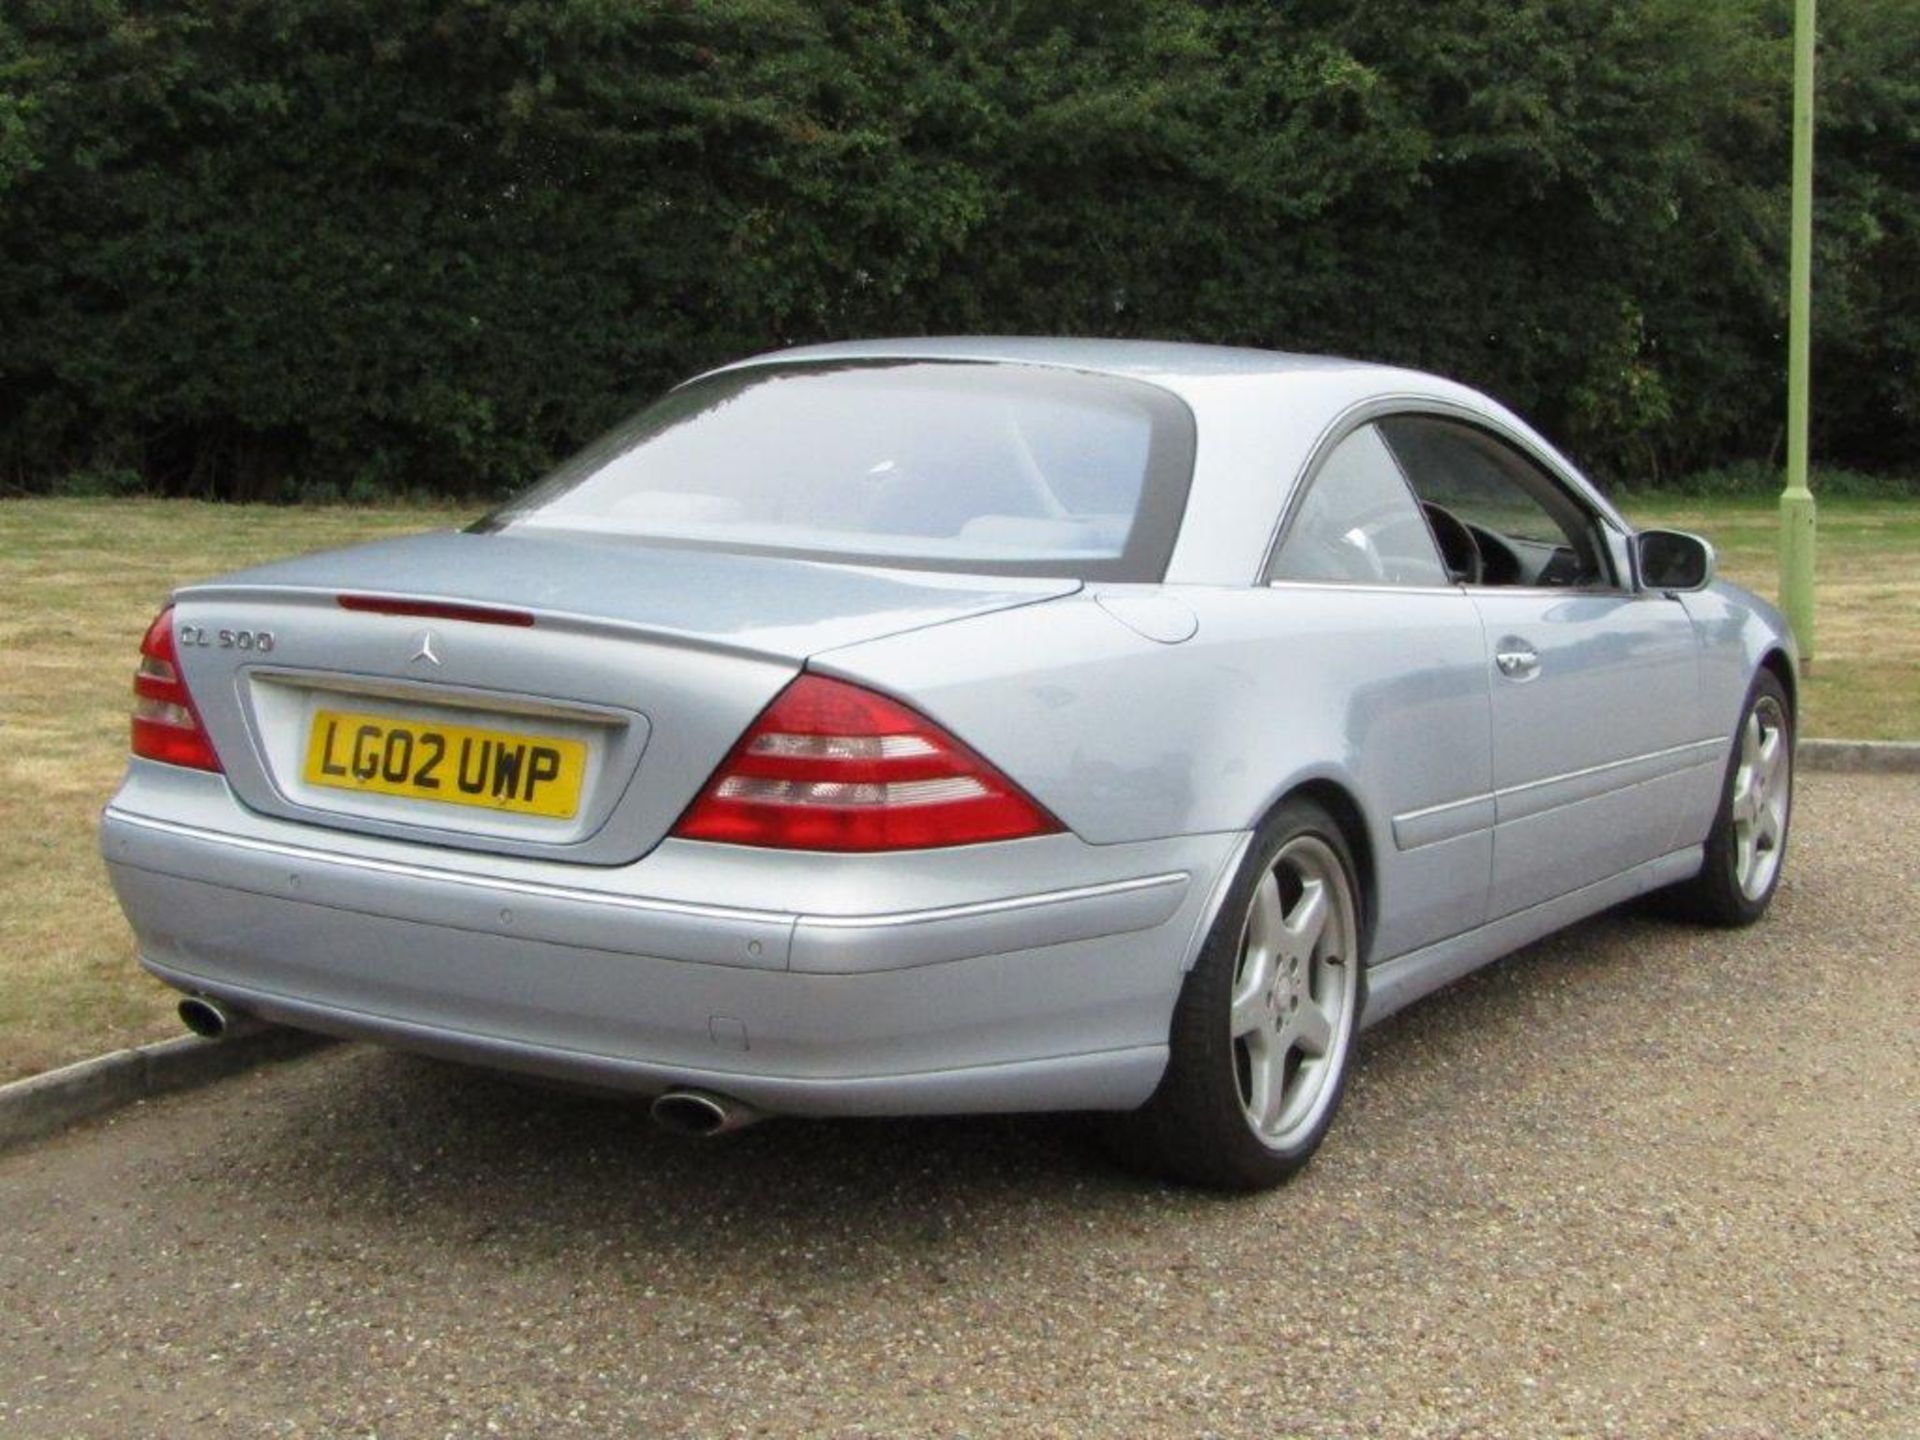 2002 Mercedes CL500 Coupe - Image 6 of 12